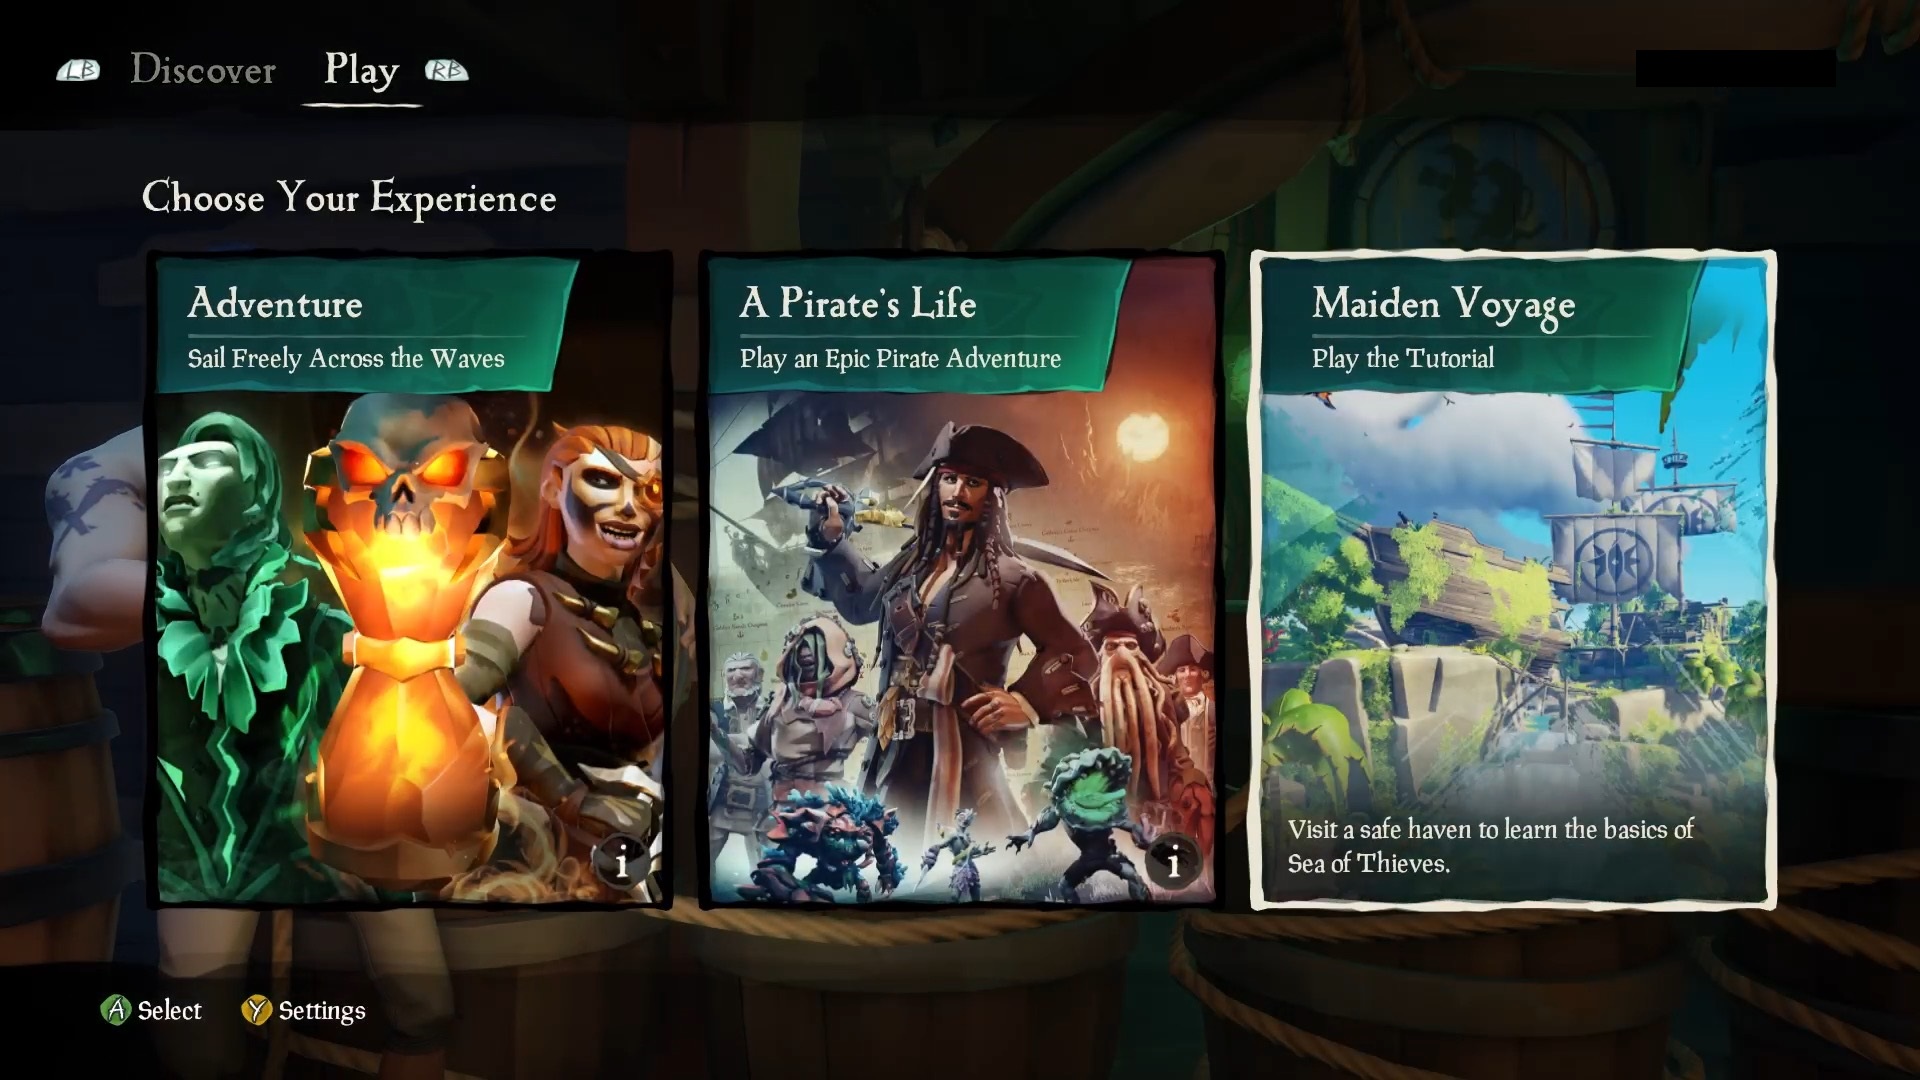 Sea of Thieves ゲームのスクリーンショット。[Choose Your Experience with Studio - Play the Tutorial selected](チュートリアルを選択して再生) を示しています。